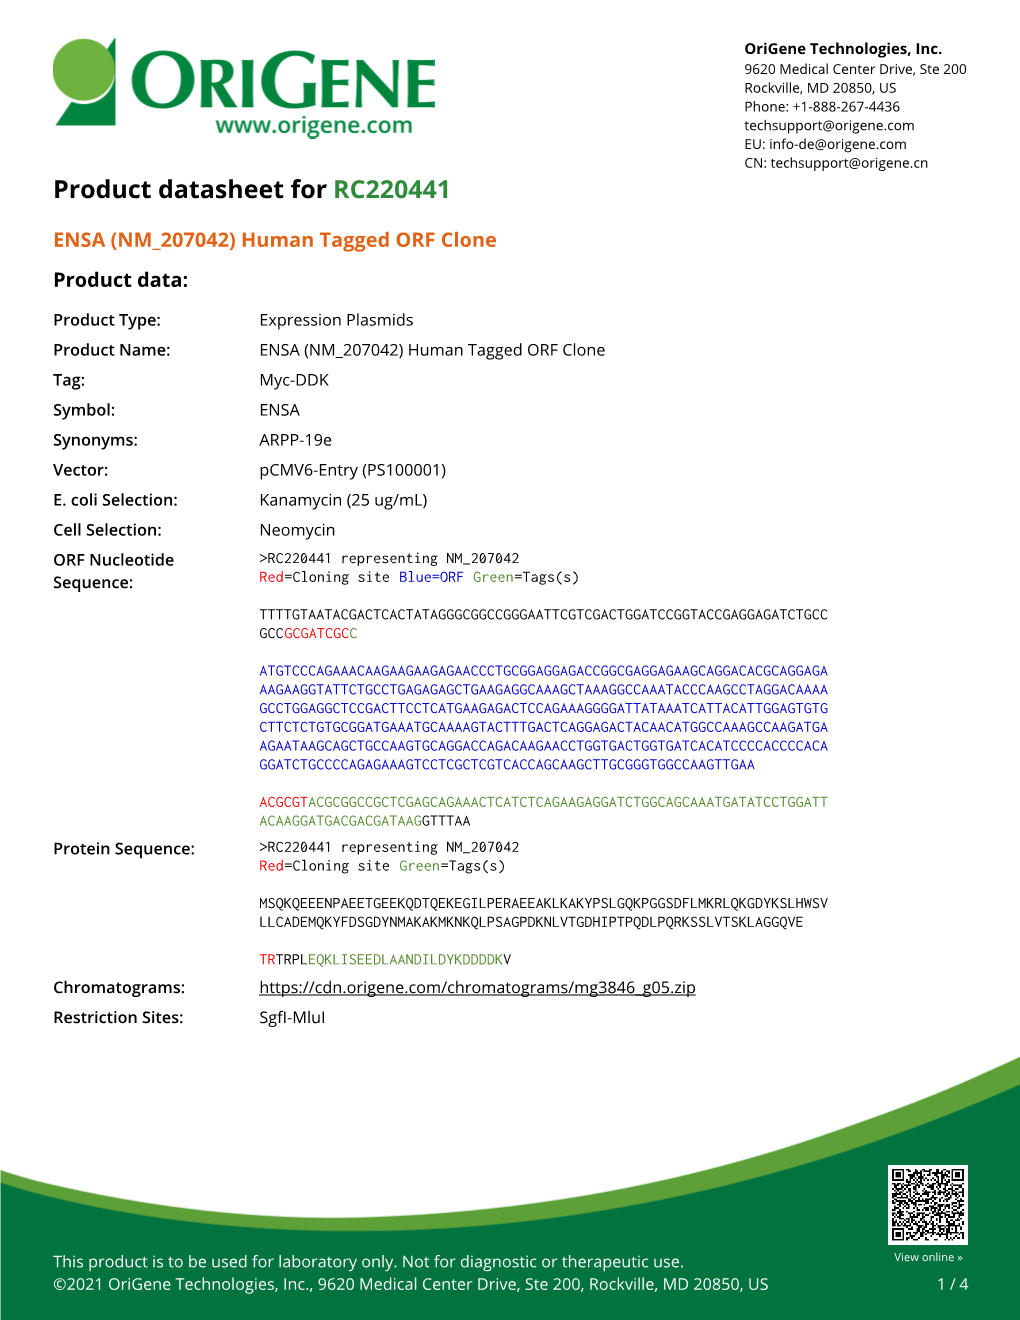 ENSA (NM 207042) Human Tagged ORF Clone Product Data